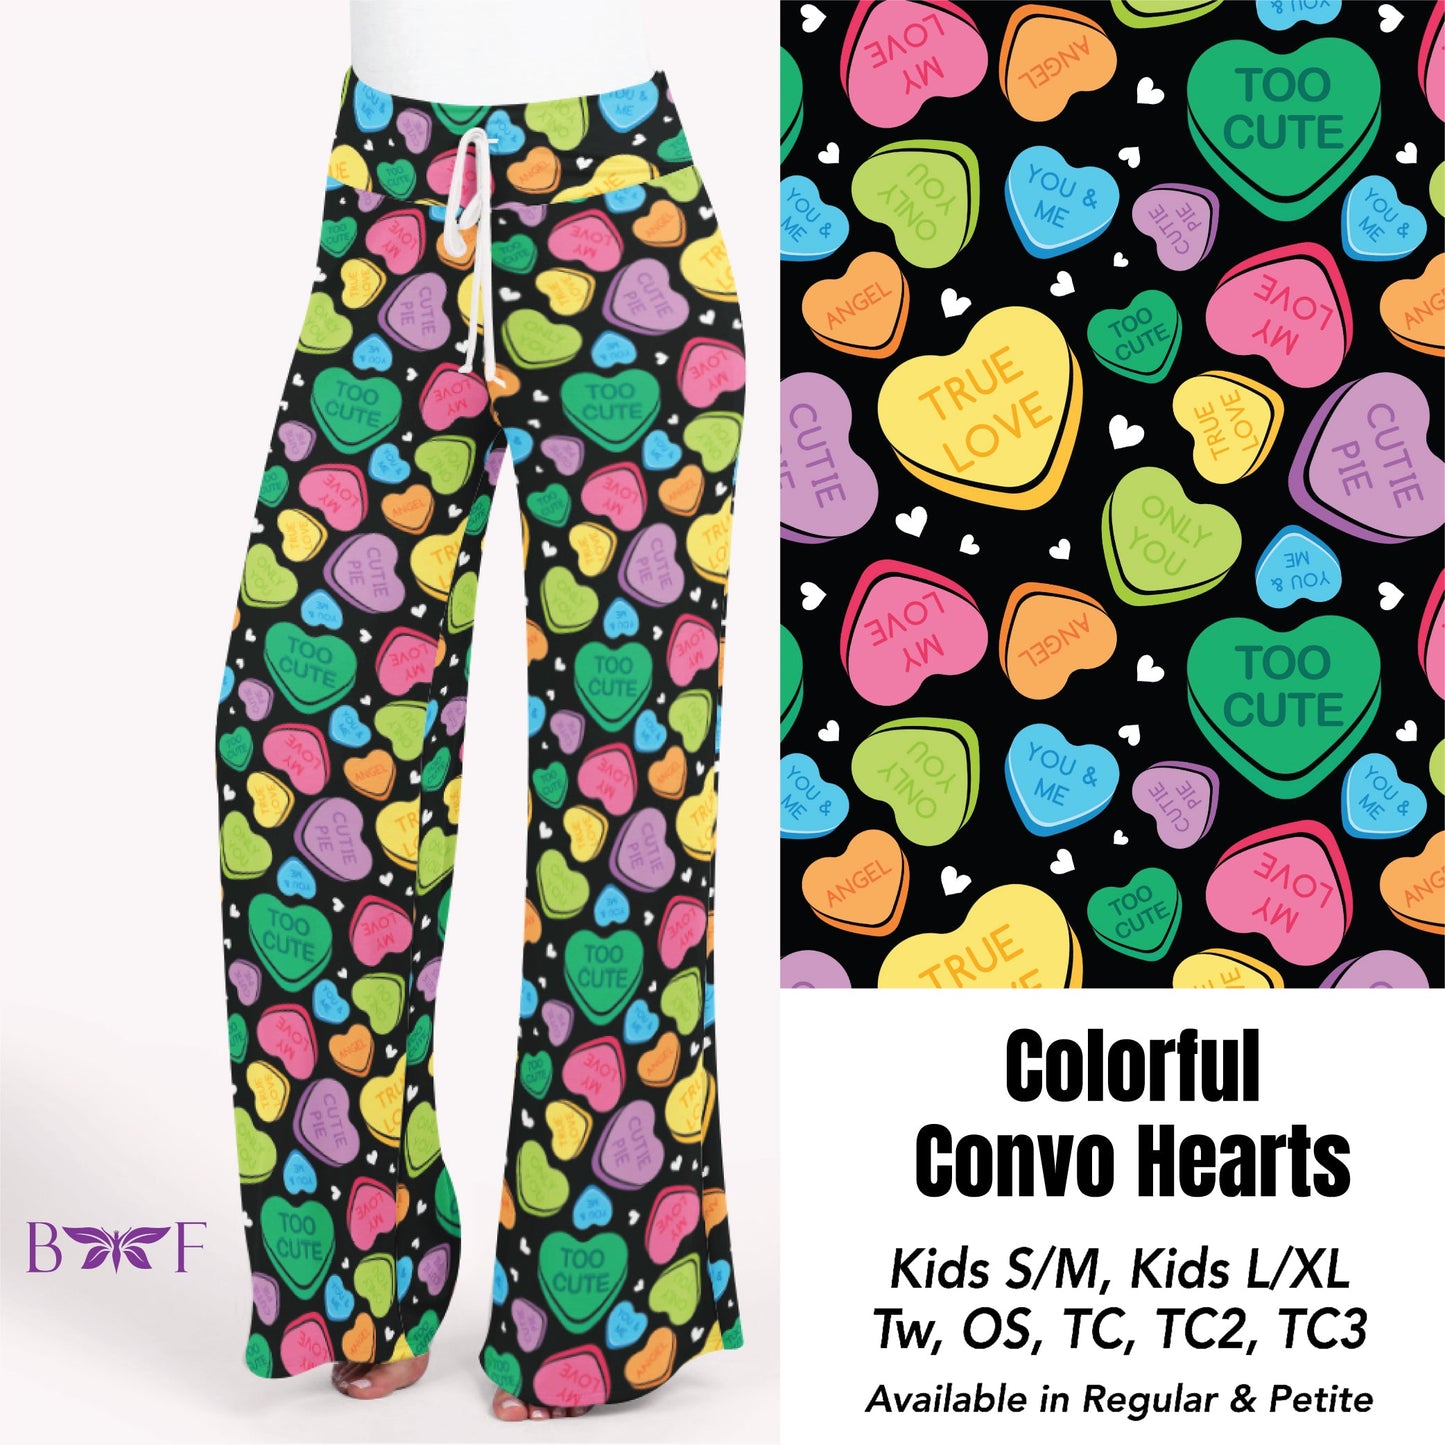 Colorful Convo Hearts leggings and capris with pockets